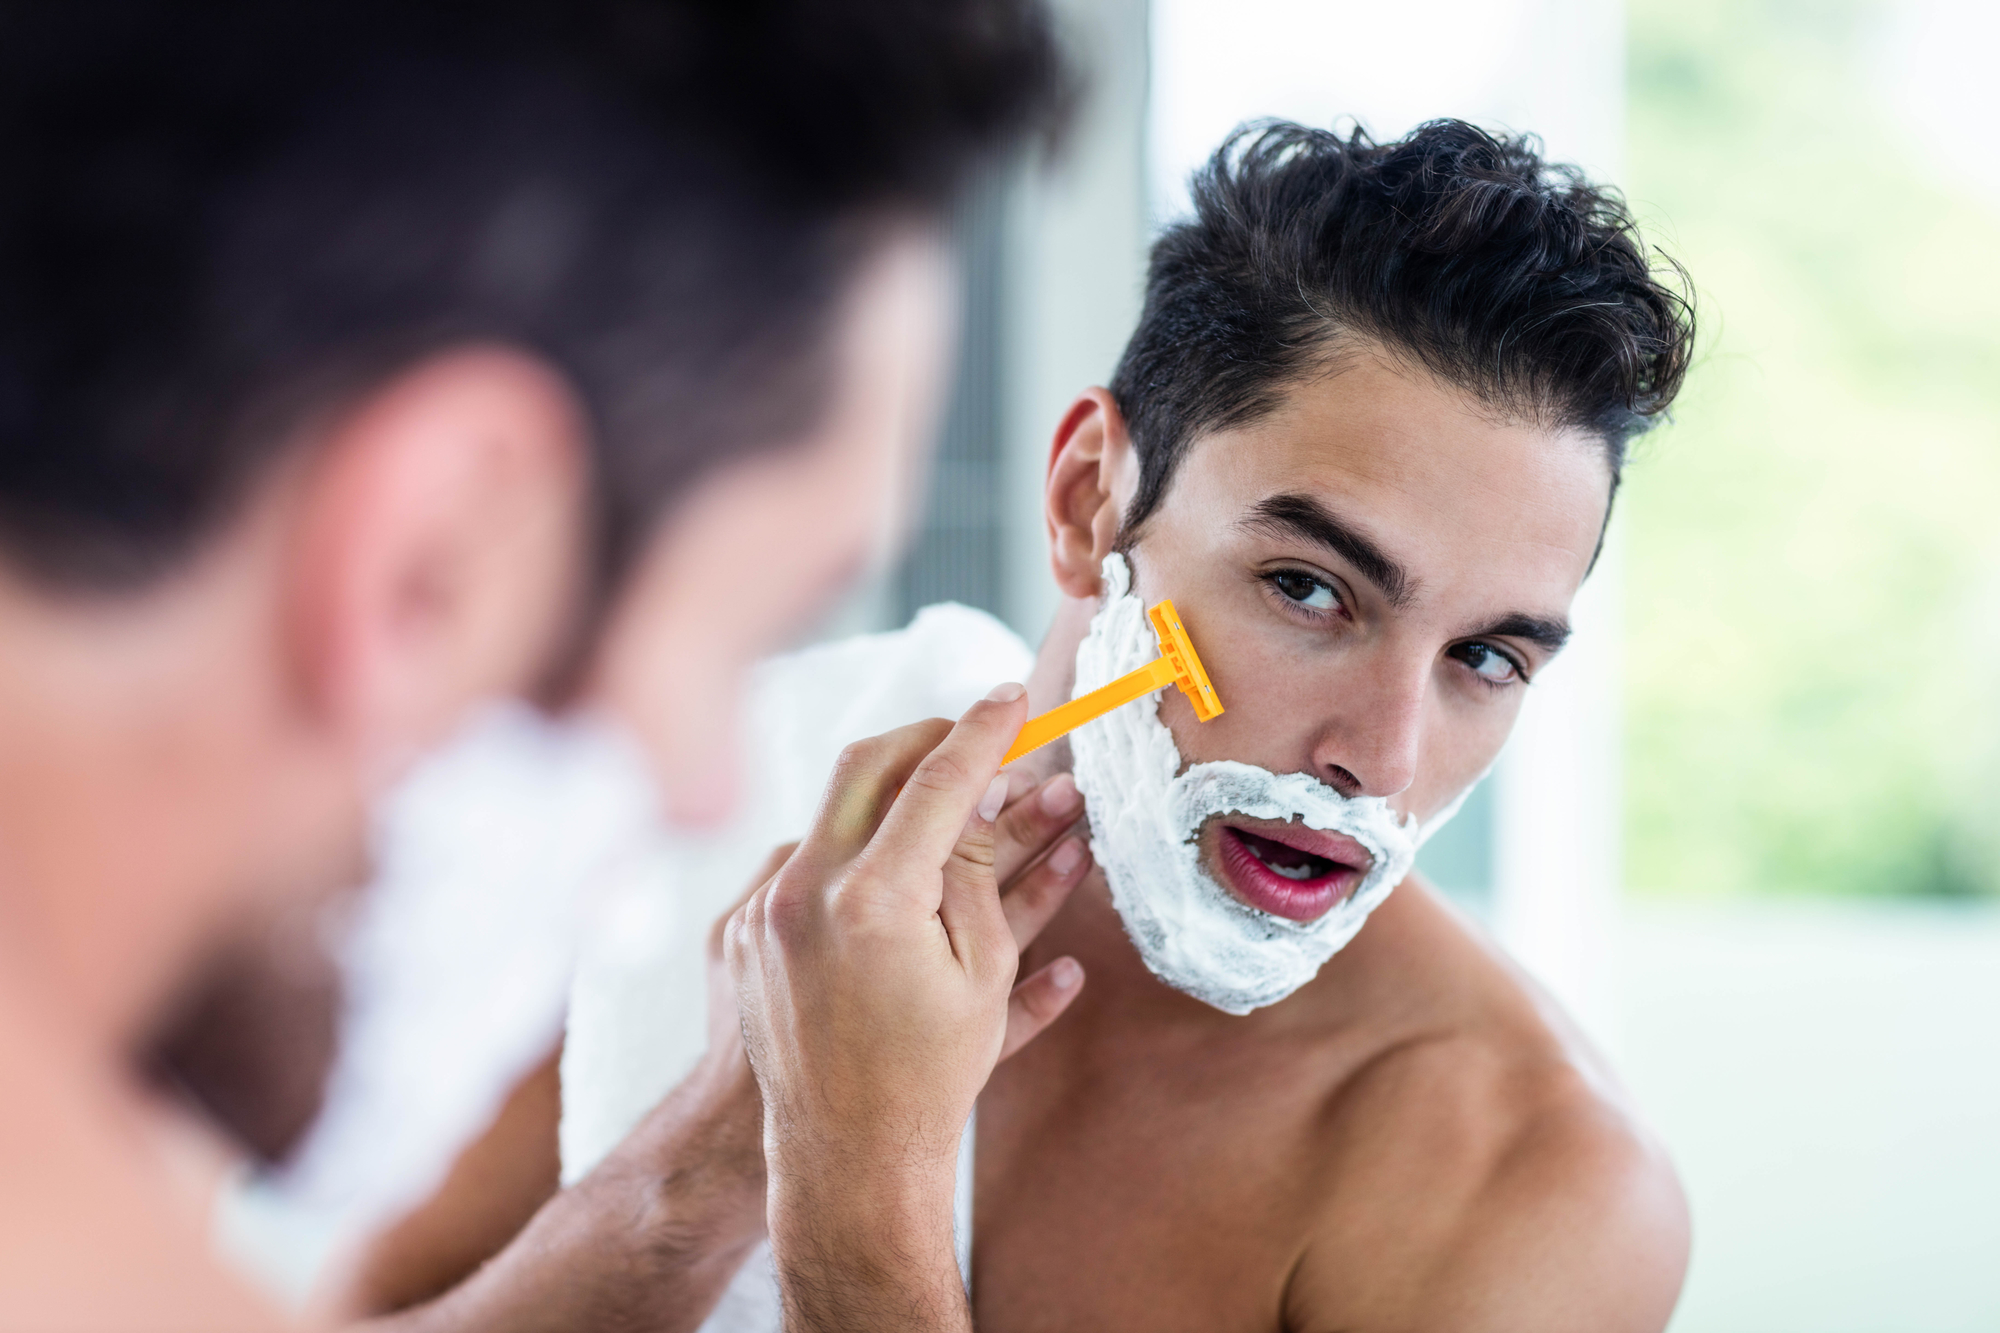 How To Shave Your Pubes Without A Razor How To Shave With A Safety Razor He Spoke Style